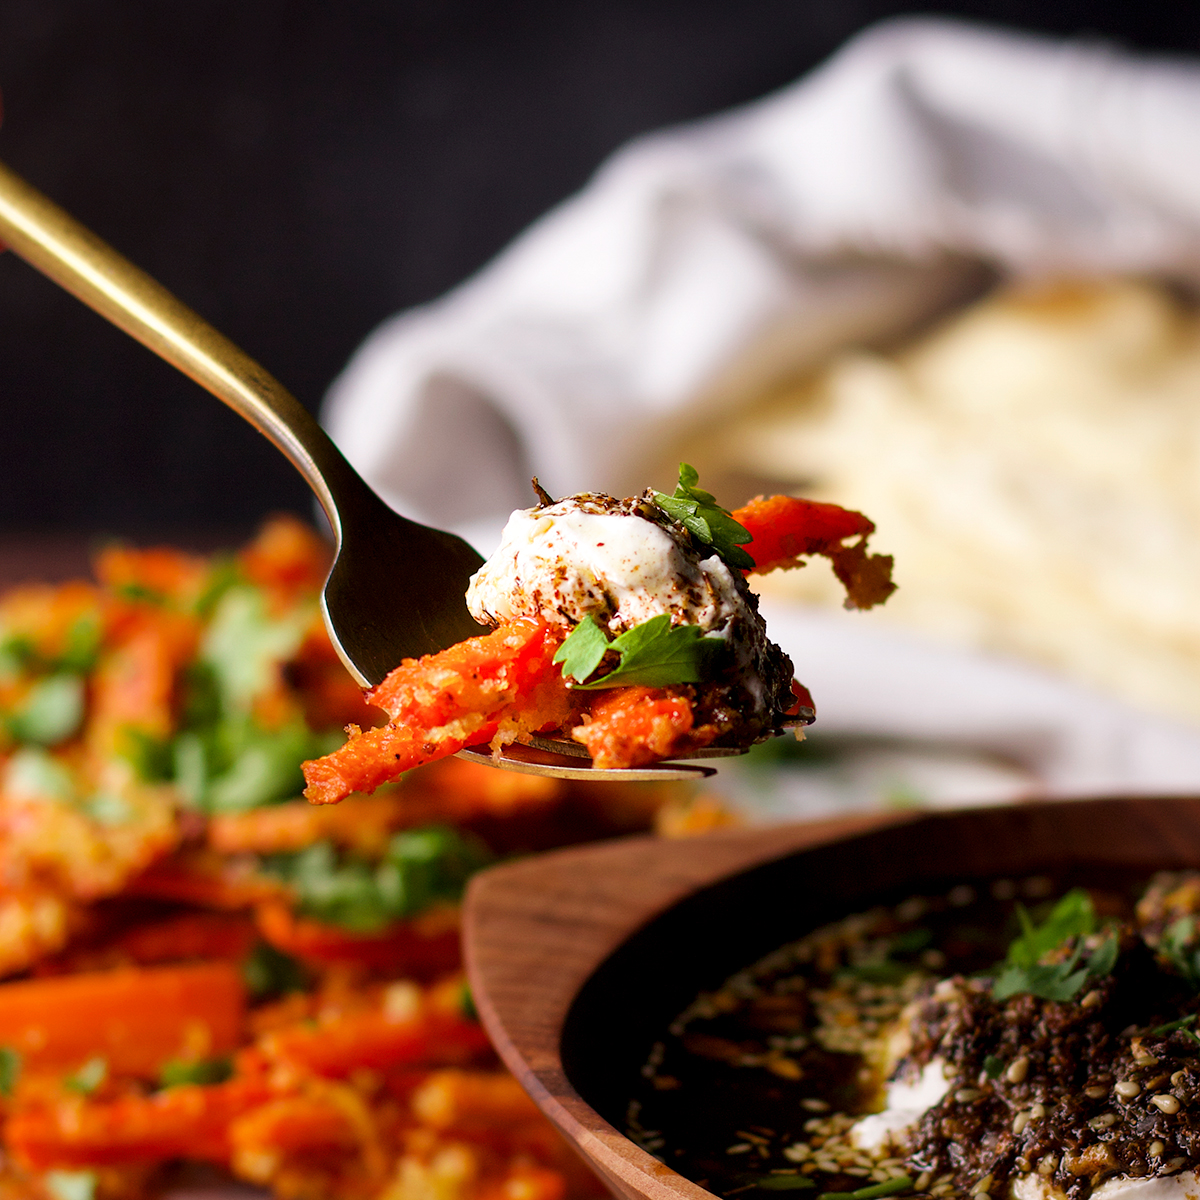 Someone lifting a forkful of carrot fries topped with a dollop of za'atar labneh.